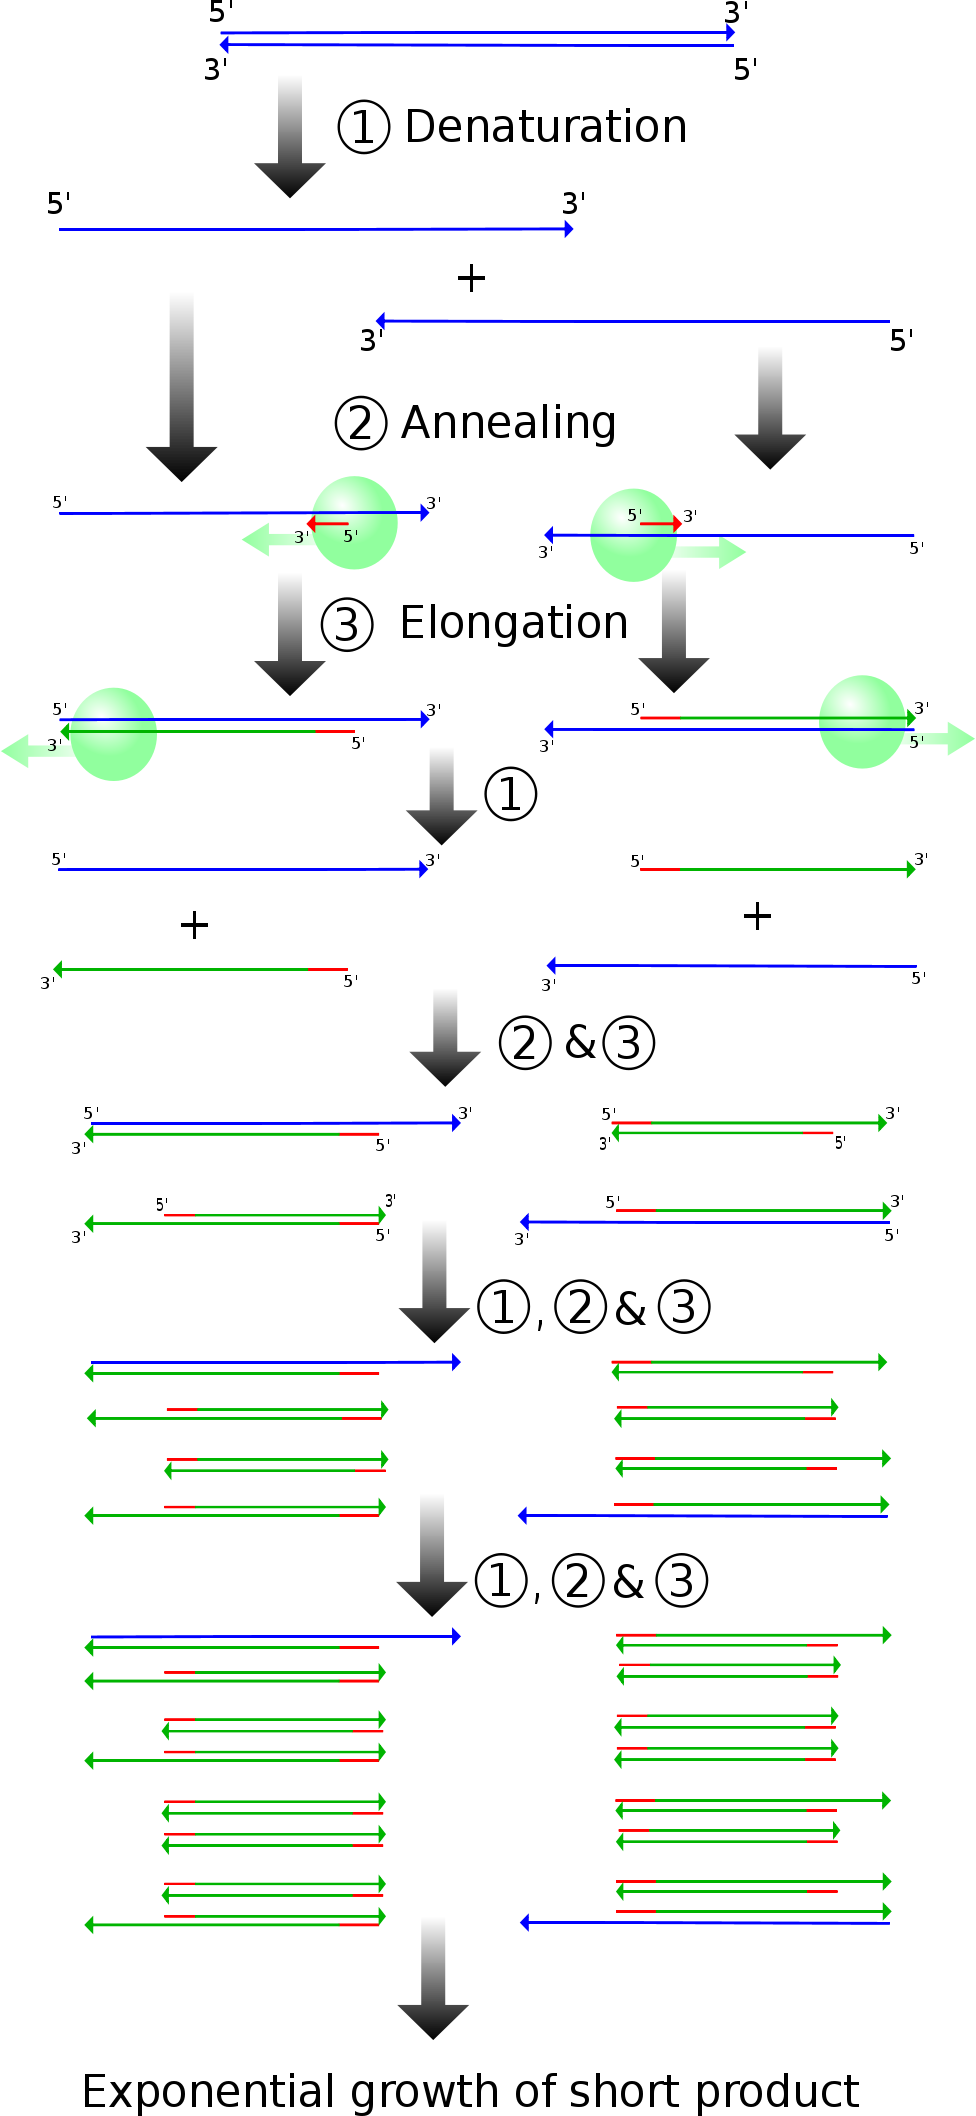  Diagram of PCR products and stages. (Madeleine Price Ball, Creative Commons License, sourced from https://en.wikipedia.org/wiki/File:PCR.svg) 